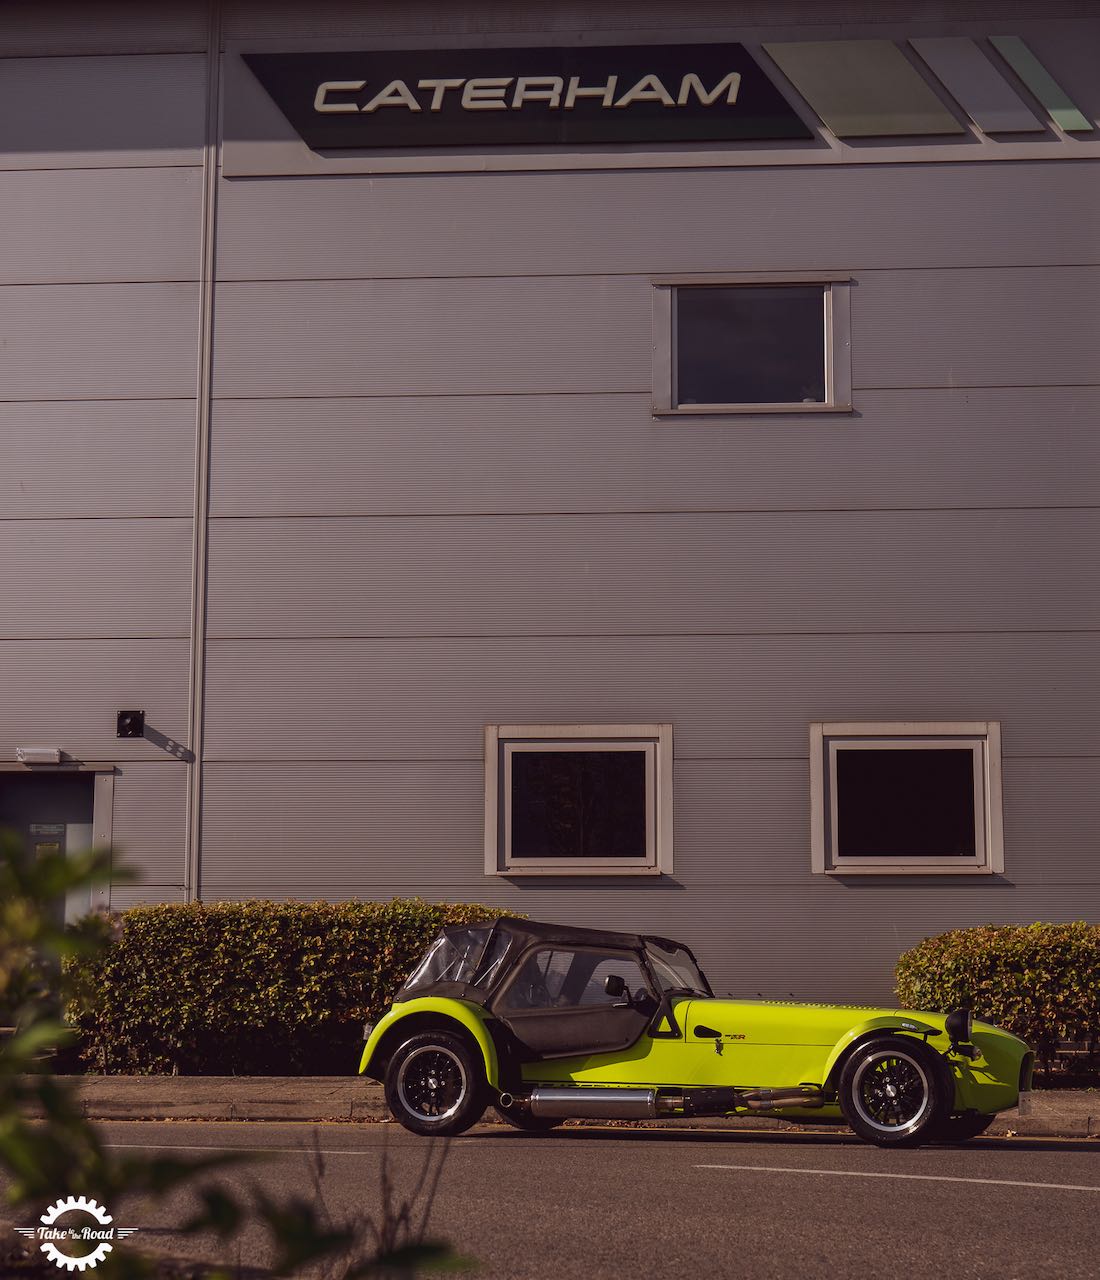 Hands on with the Caterham Seven 270R